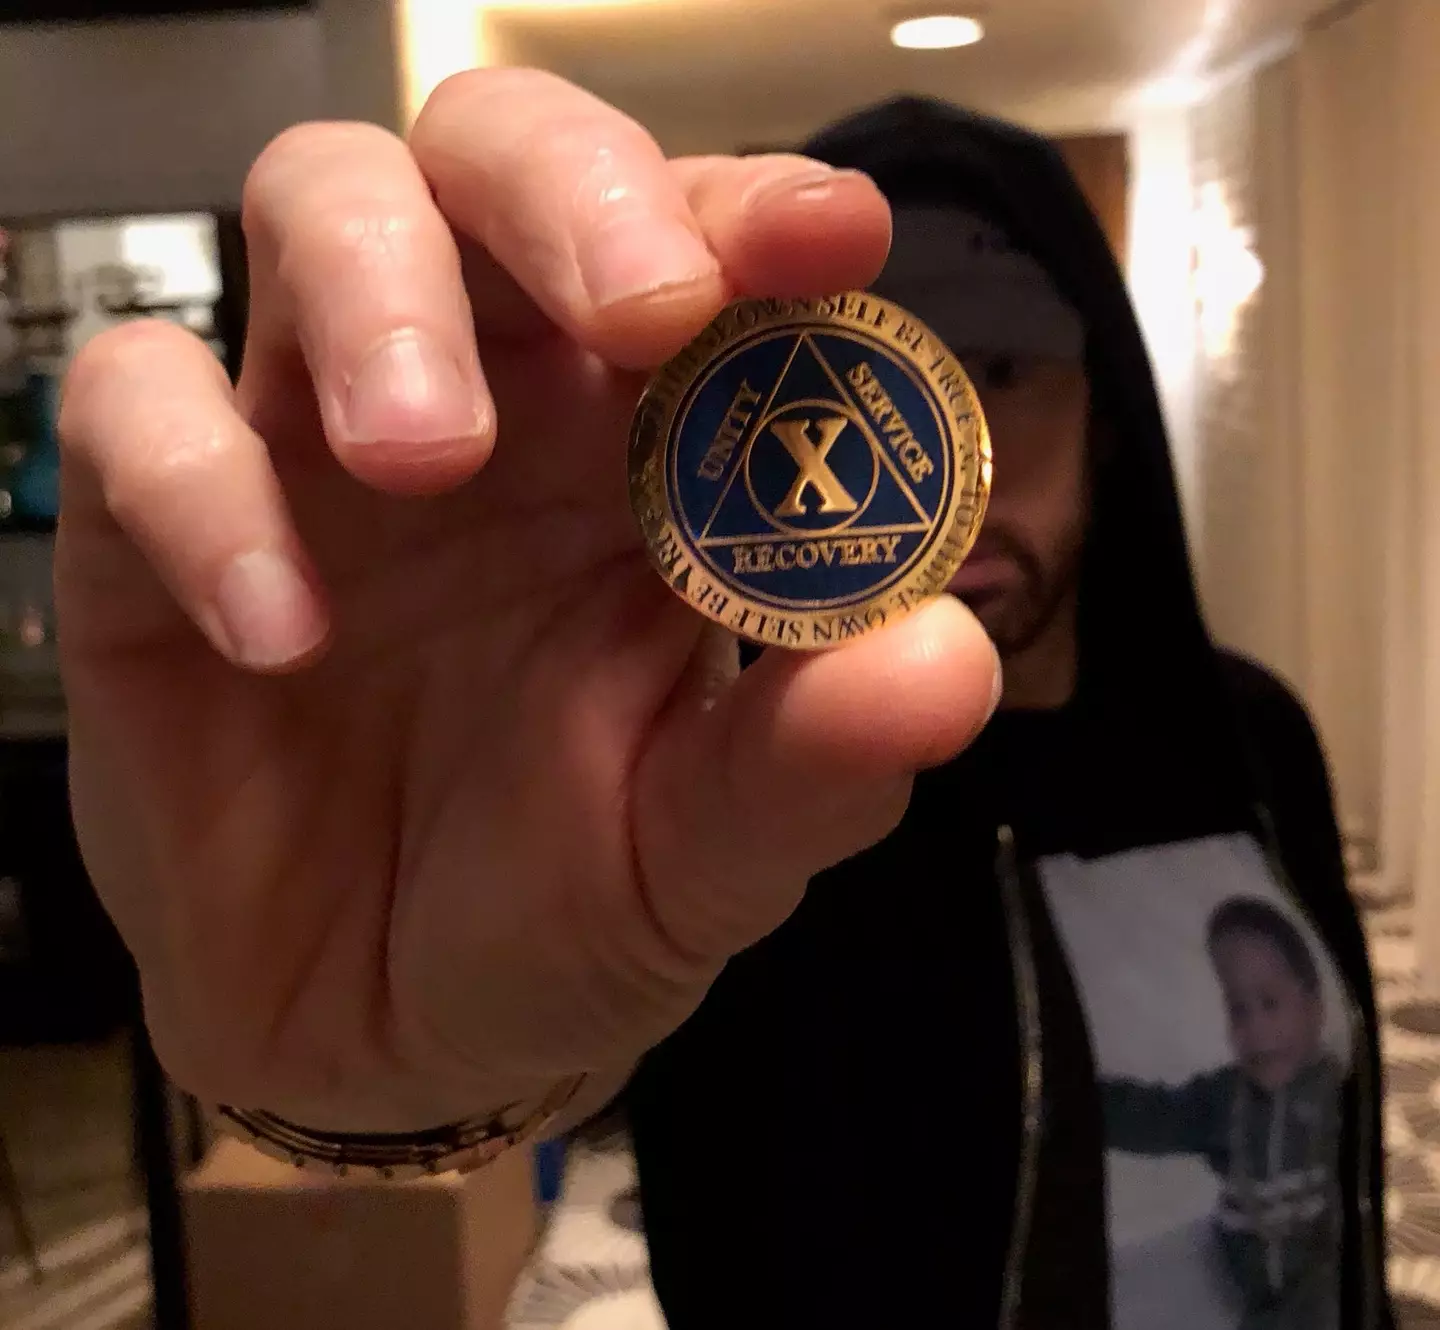 Eminem shared a photo marking his 10 year's sober in 2018.